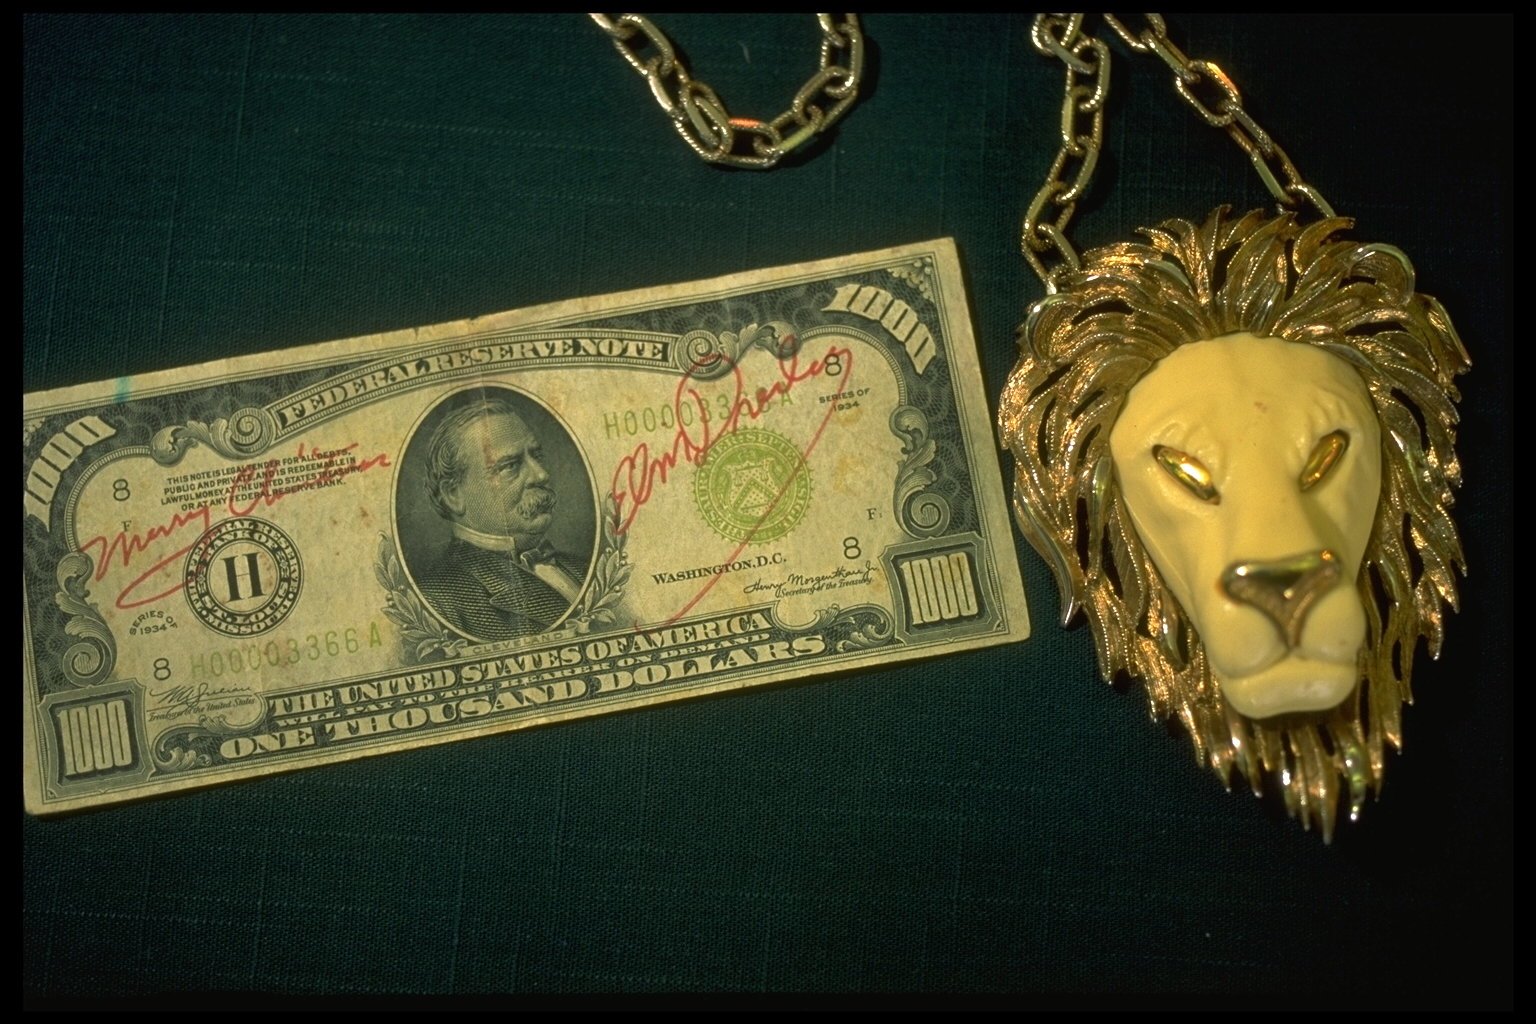 A thousand dollar bill owned by Elvis Presley next to a lion necklace